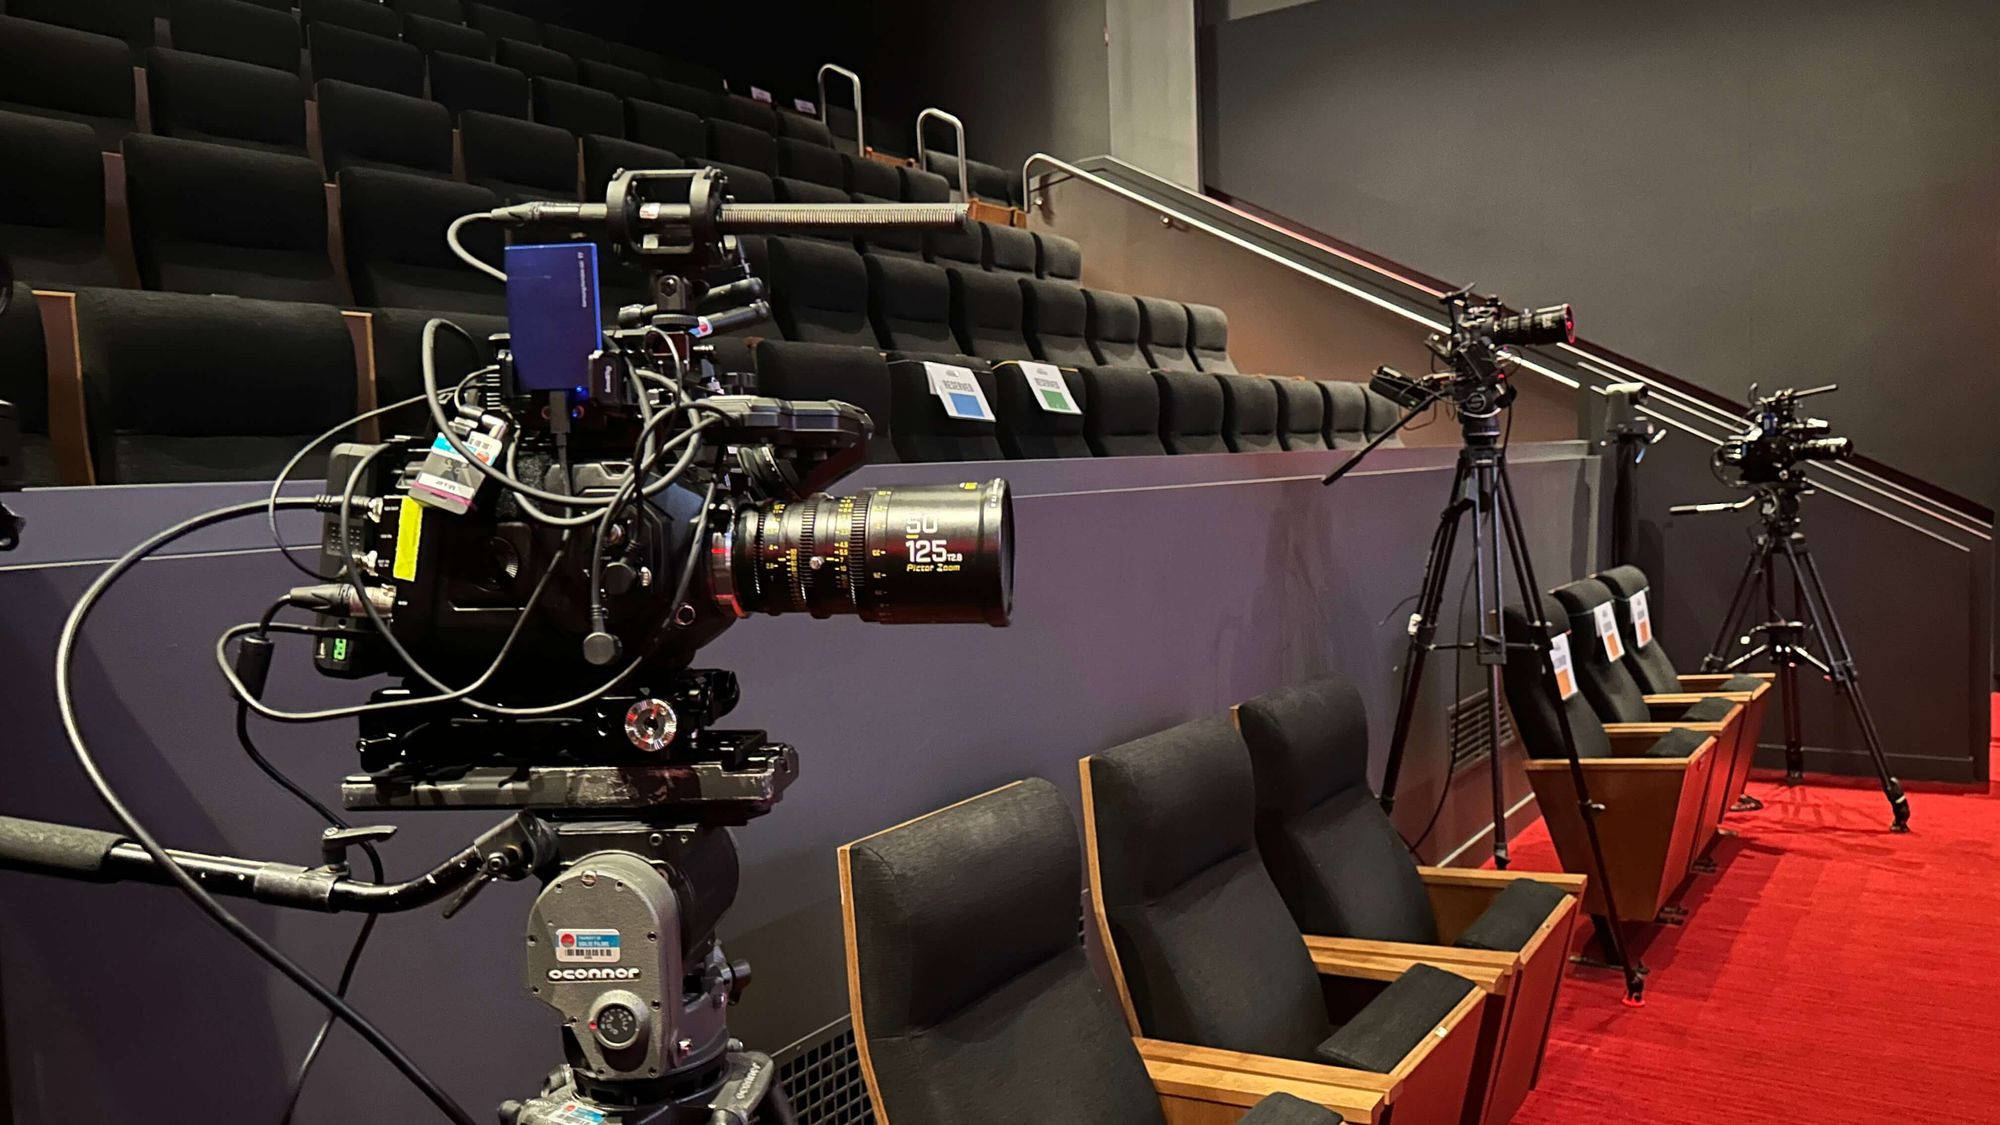 Several video cameras in an amphitheater seating area